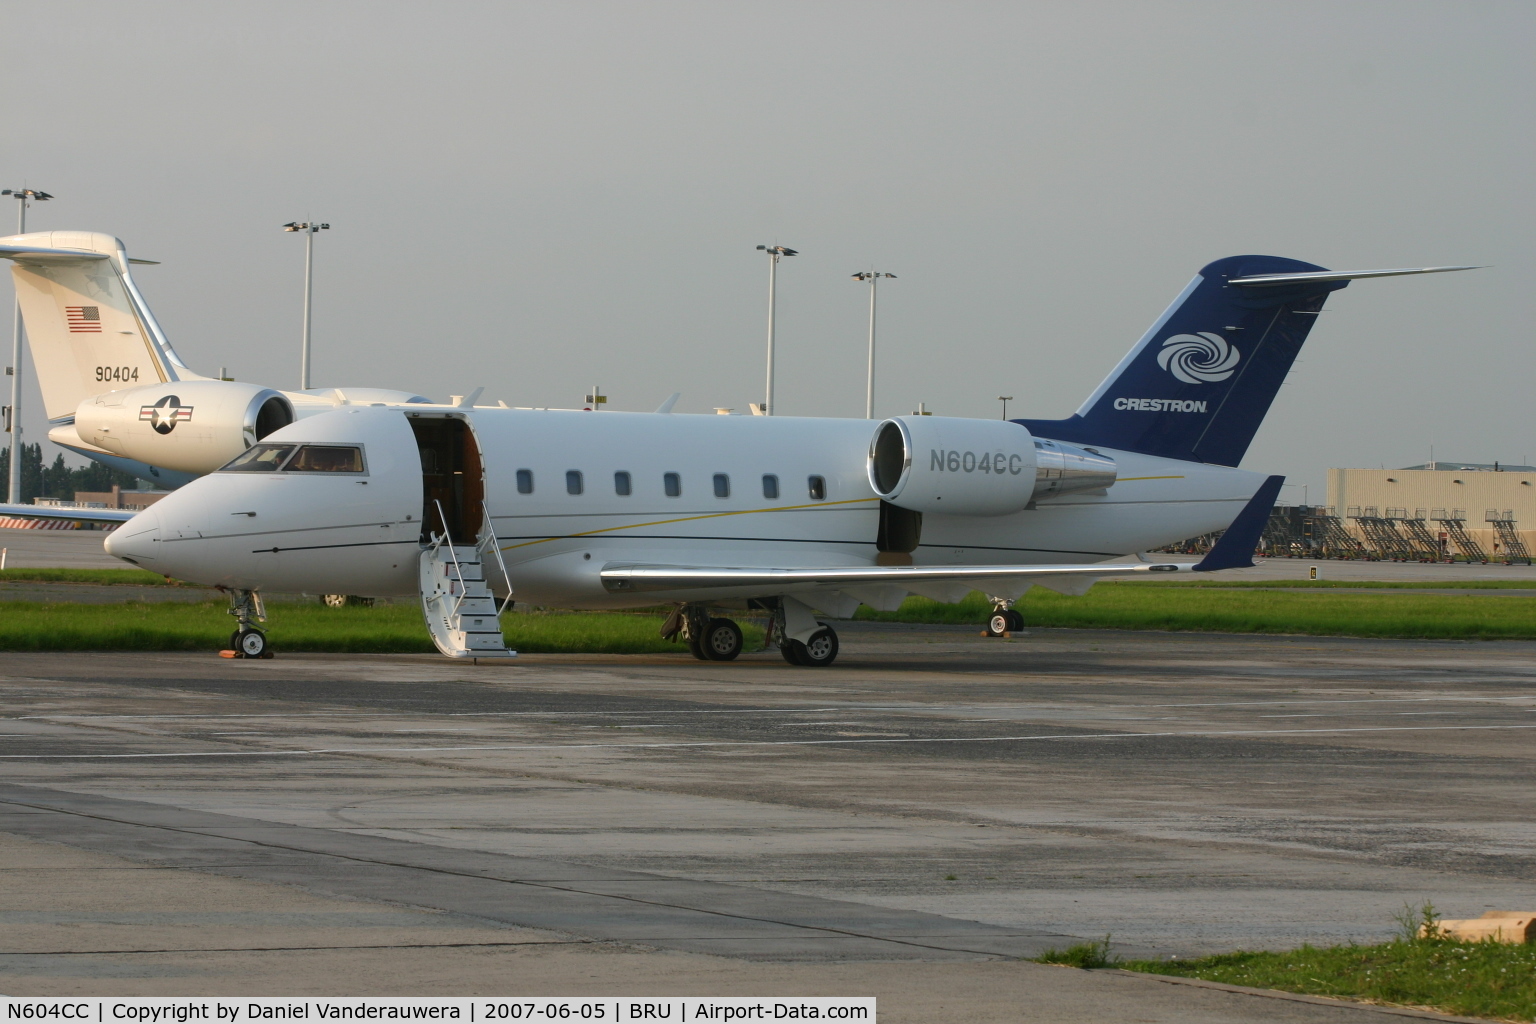 N604CC, 2005 Bombardier Challenger 604 (CL-600-2B16) C/N 5633, just arrived in EBBR